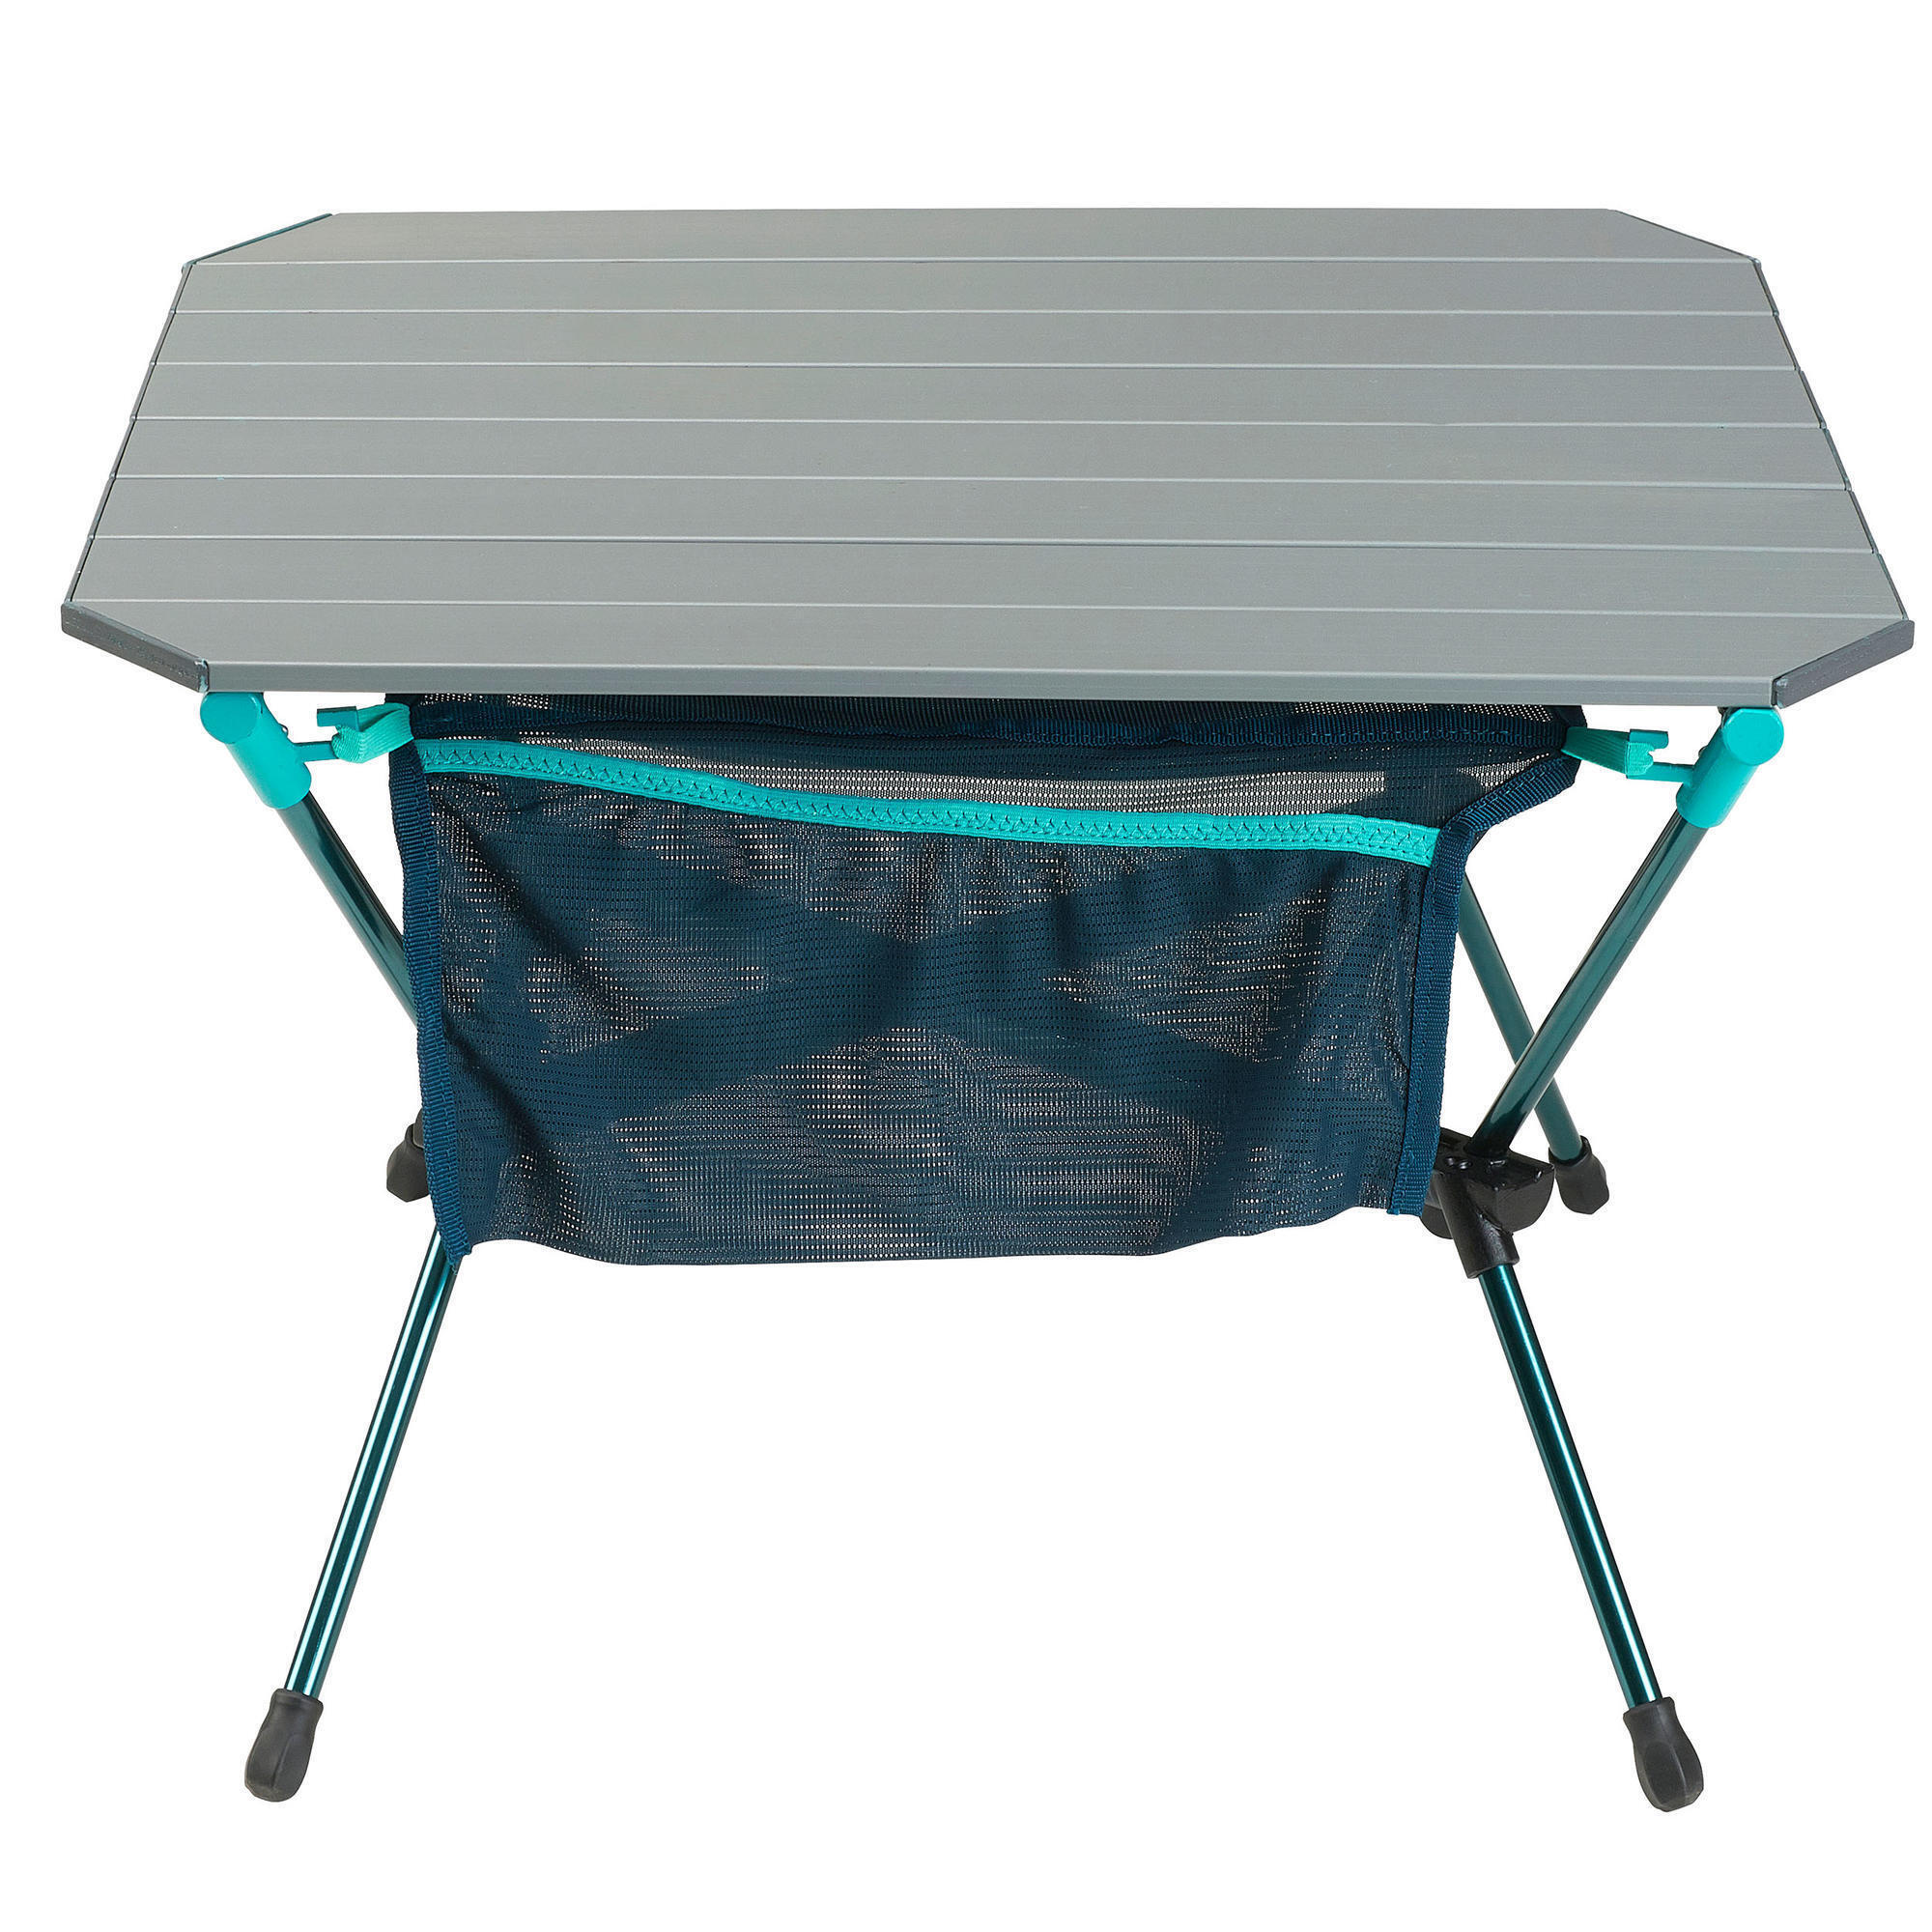 FOLDING CAMPING TABLE - MH500 10/11